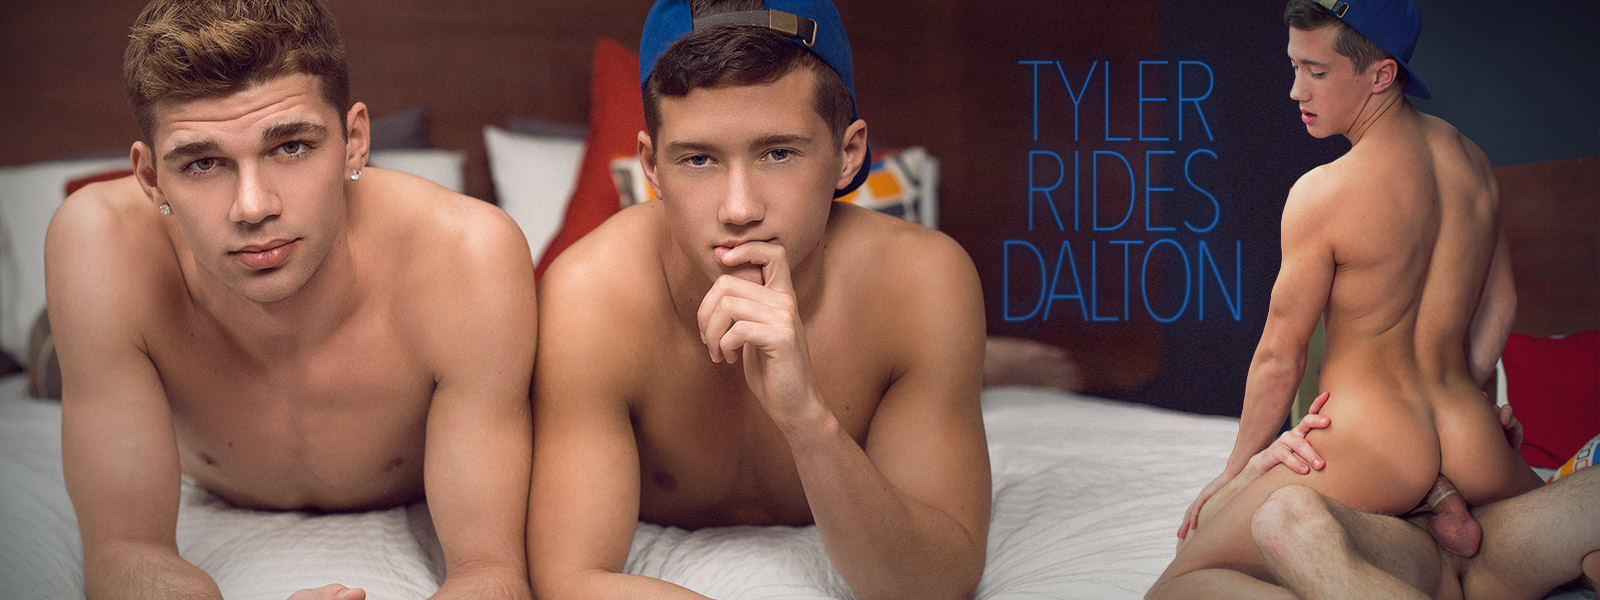 Tyler Hill riding on uncut twink Dalton Briggs cock in this scene